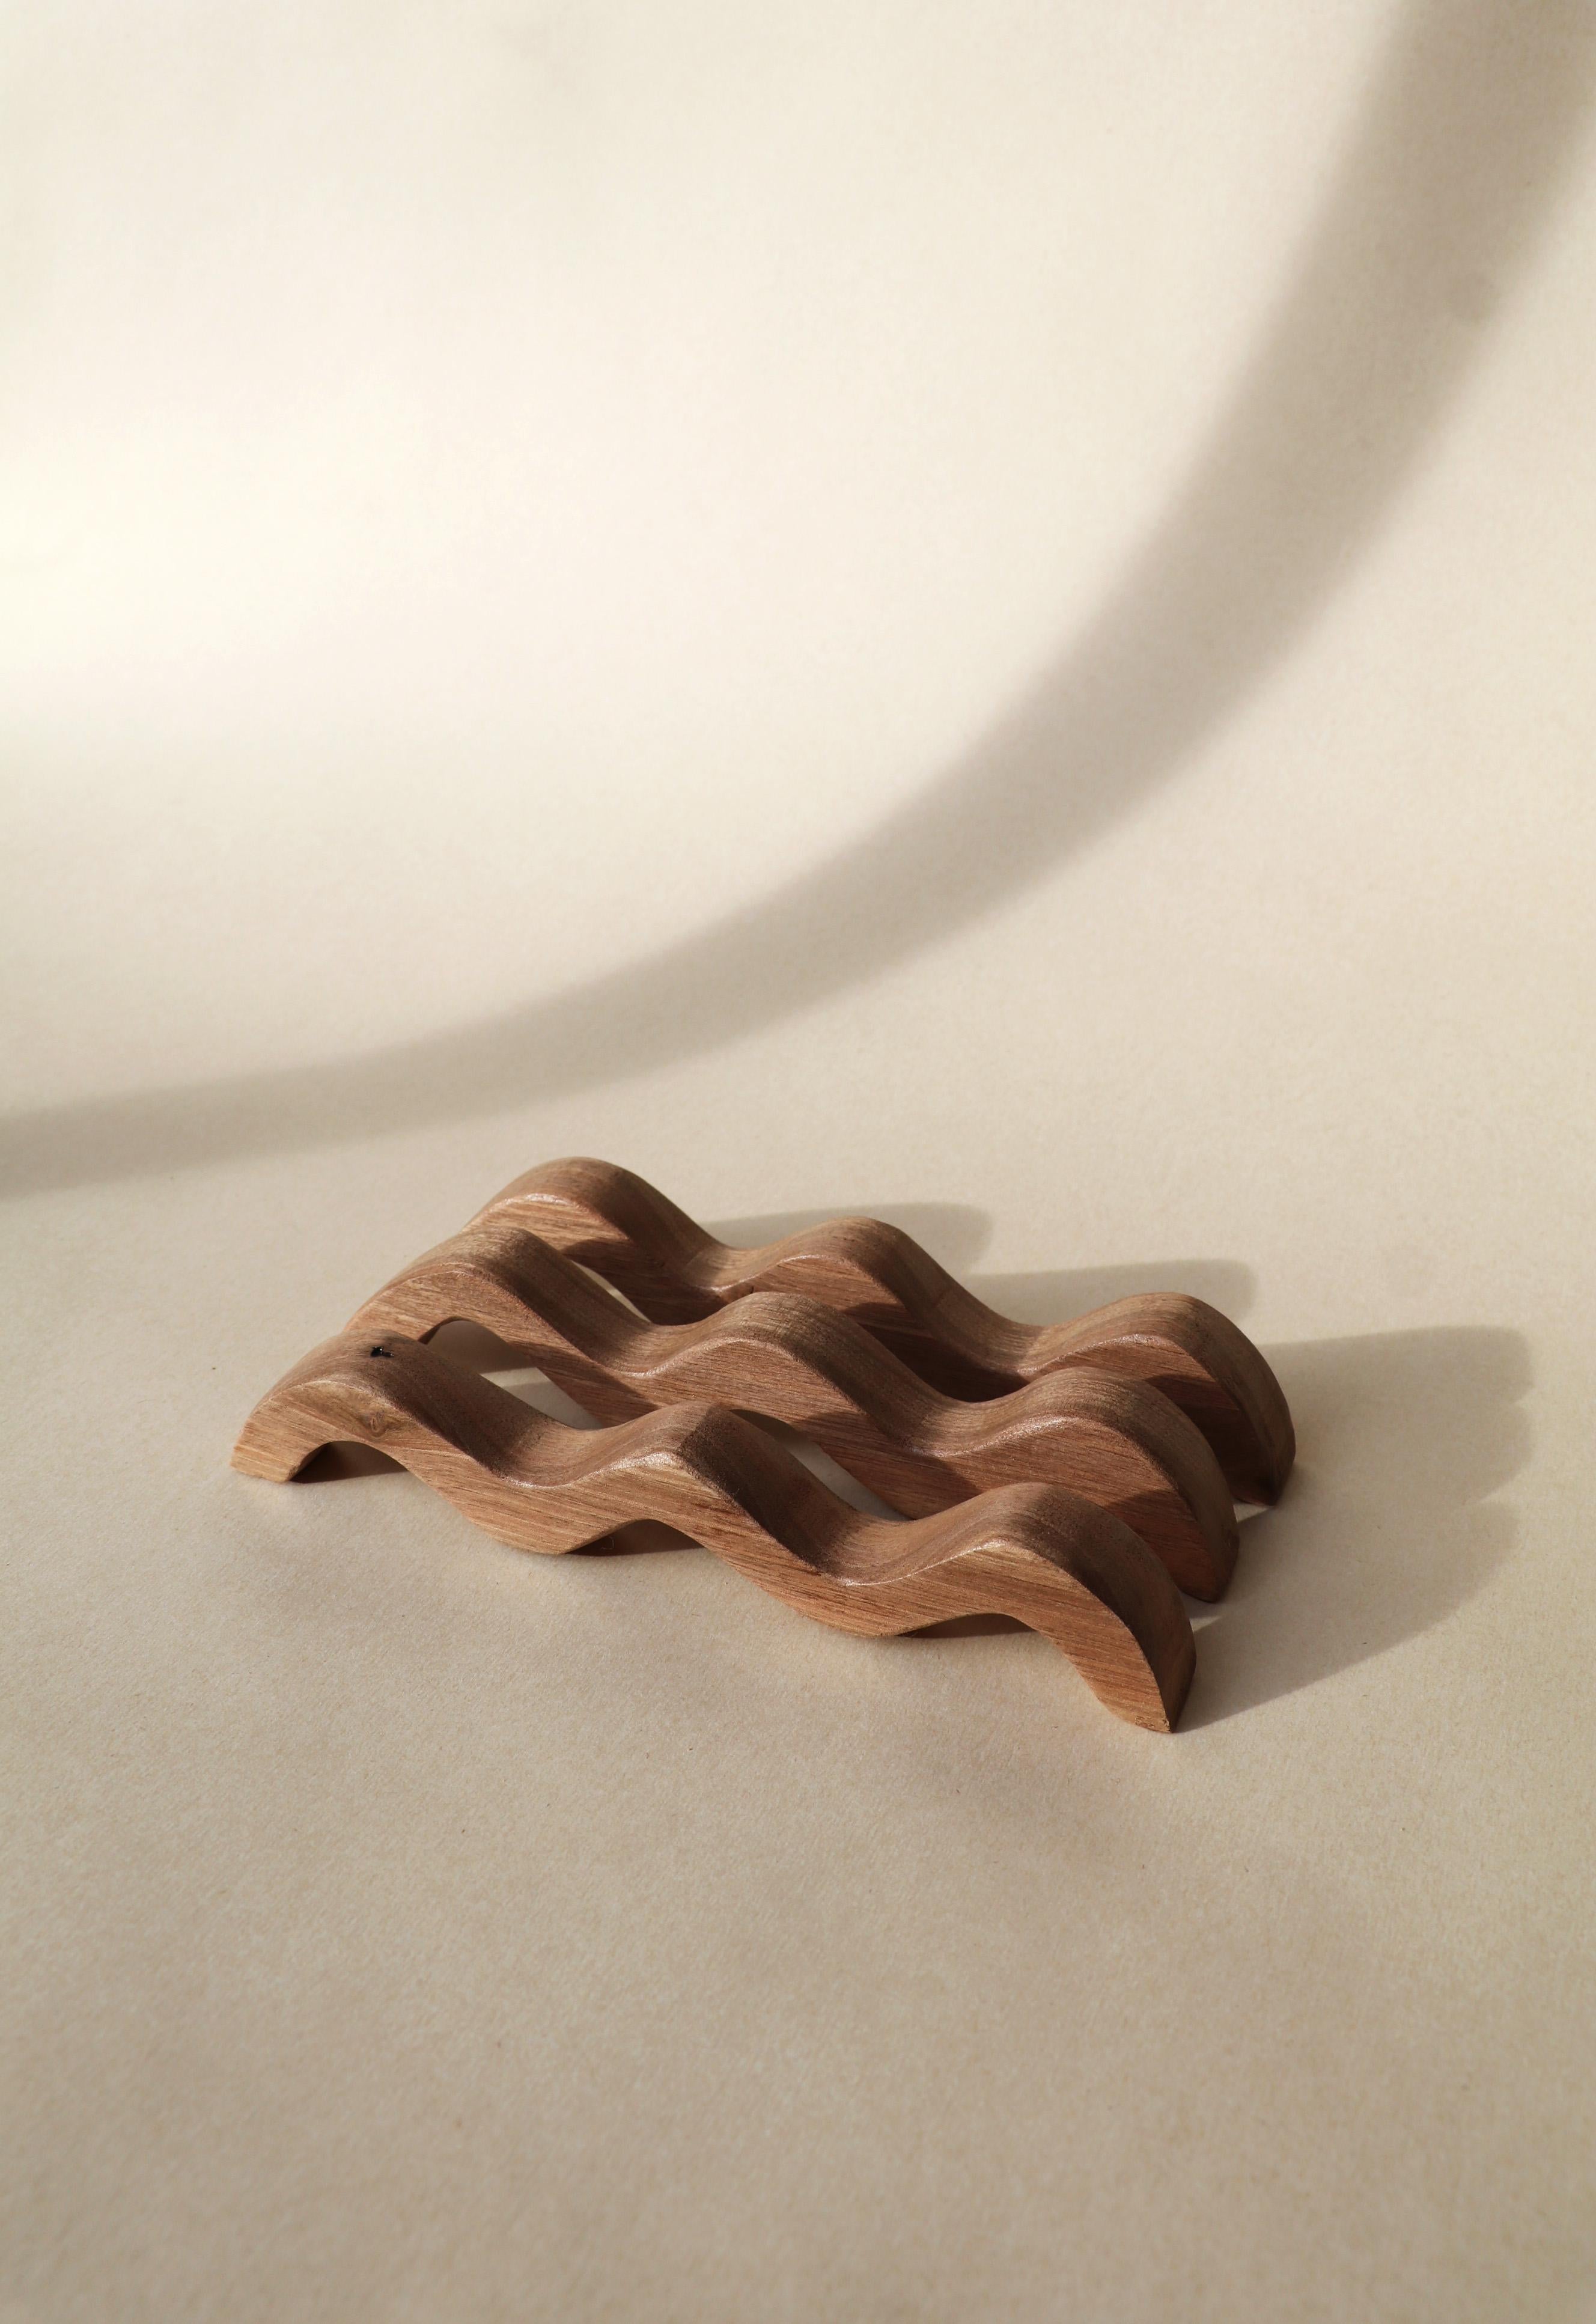 Vagues Wood Trivet by Alice Lahana Studio
Dimensions: W 20.5 x D 3 x H 4 cm (dimensions may vary)
Materials: Walnut

Handcrafted in walnut, the Waves trivet is made up of three individual and modular elements. It thus offers an infinity of